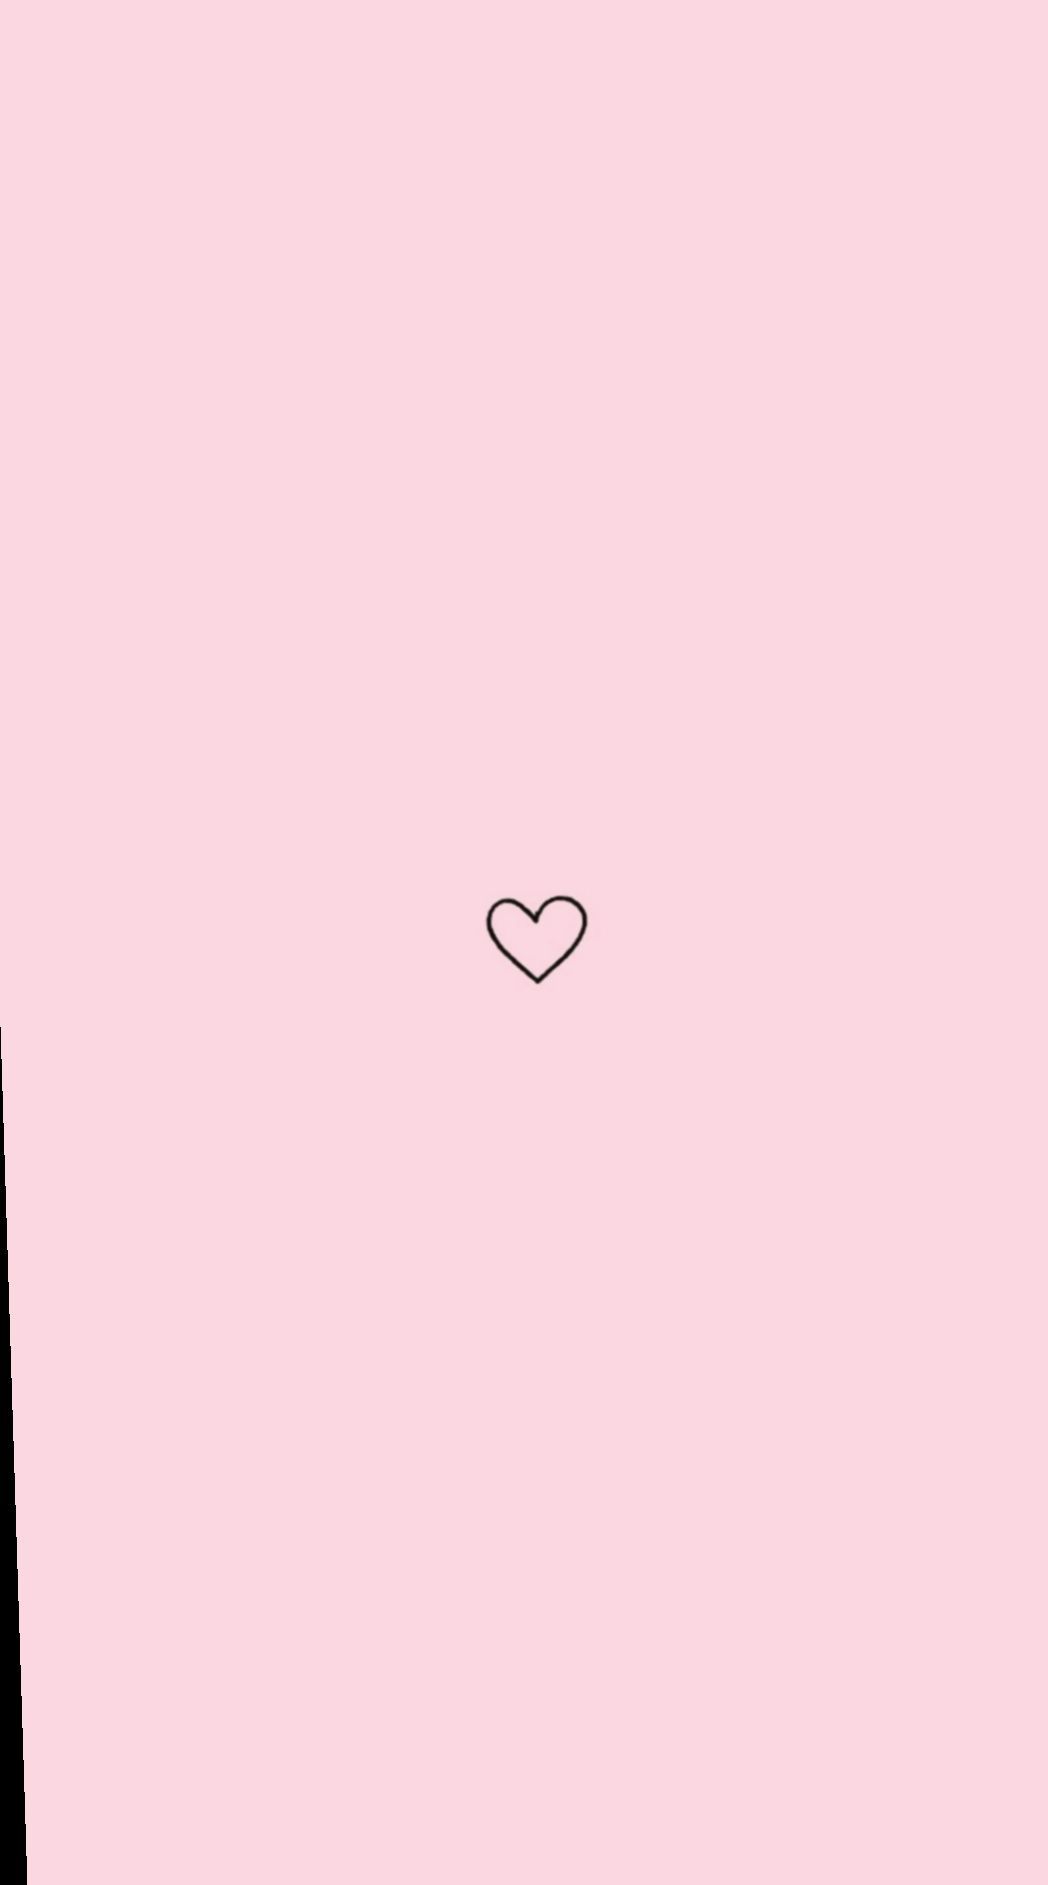 Pastel Pink Hearts Wallpapers - Top Free Pastel Pink Hearts Backgrounds ...